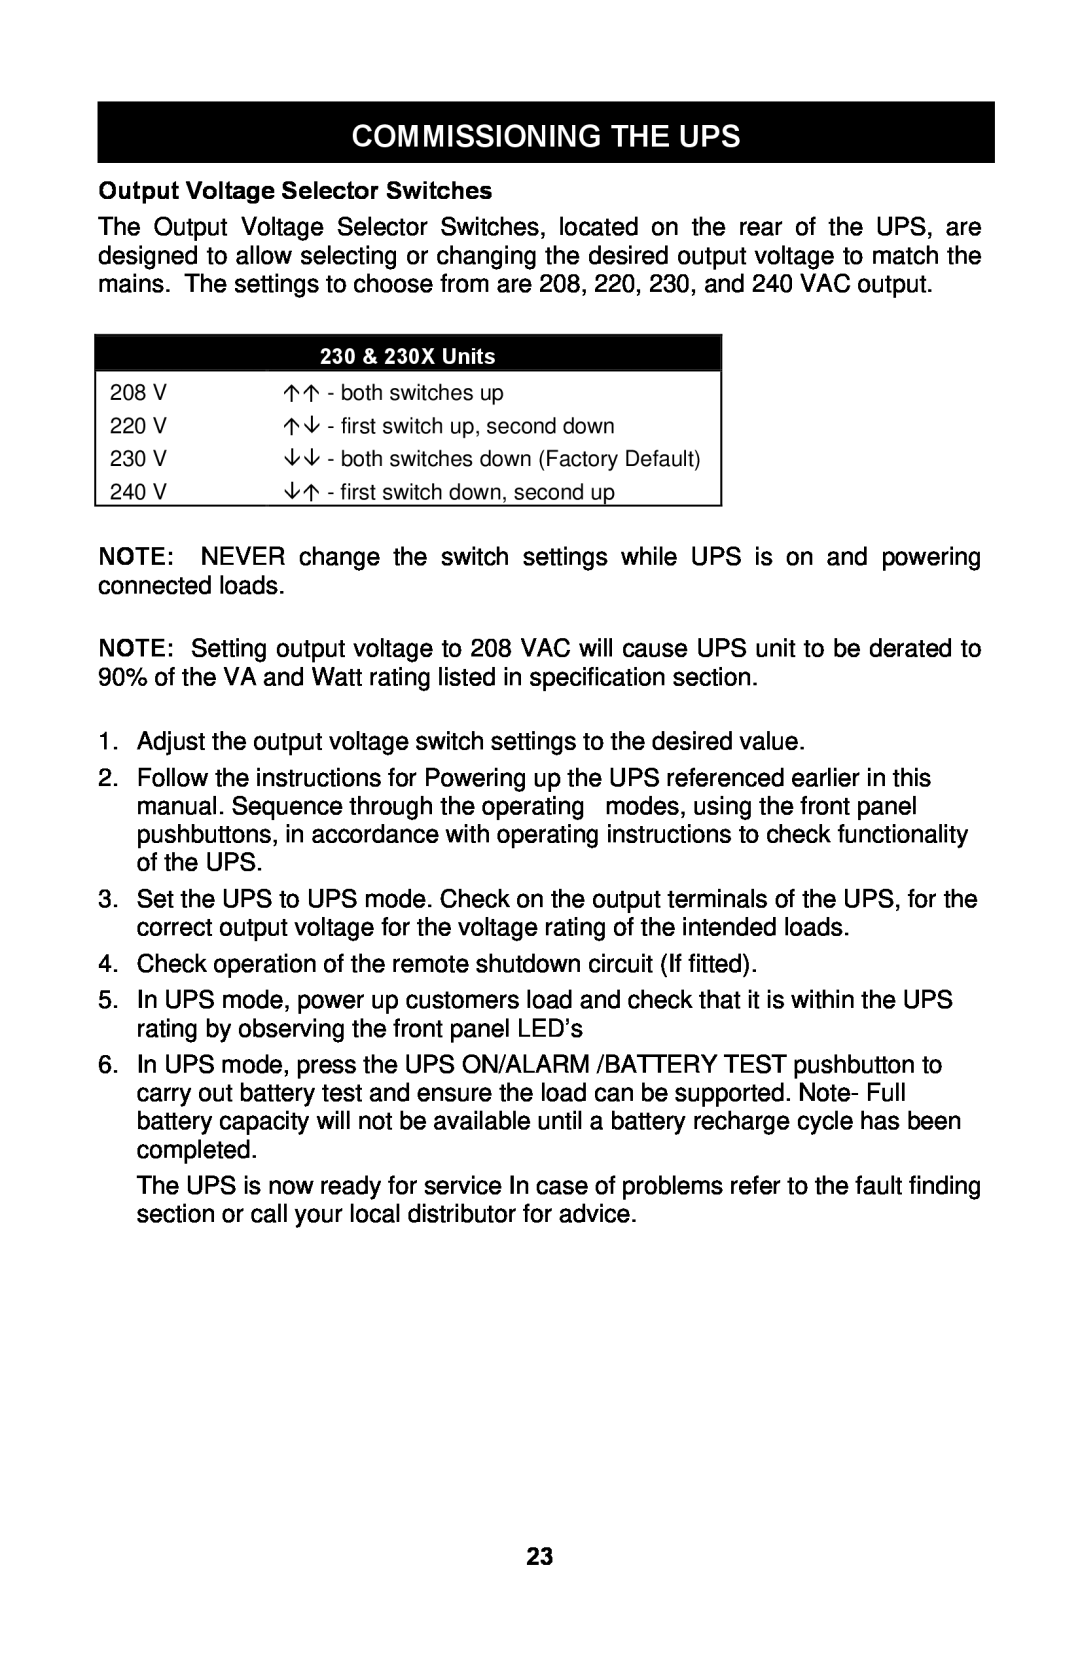 Liebert GXTTM user manual Commissioning The Ups, Output Voltage Selector Switches 